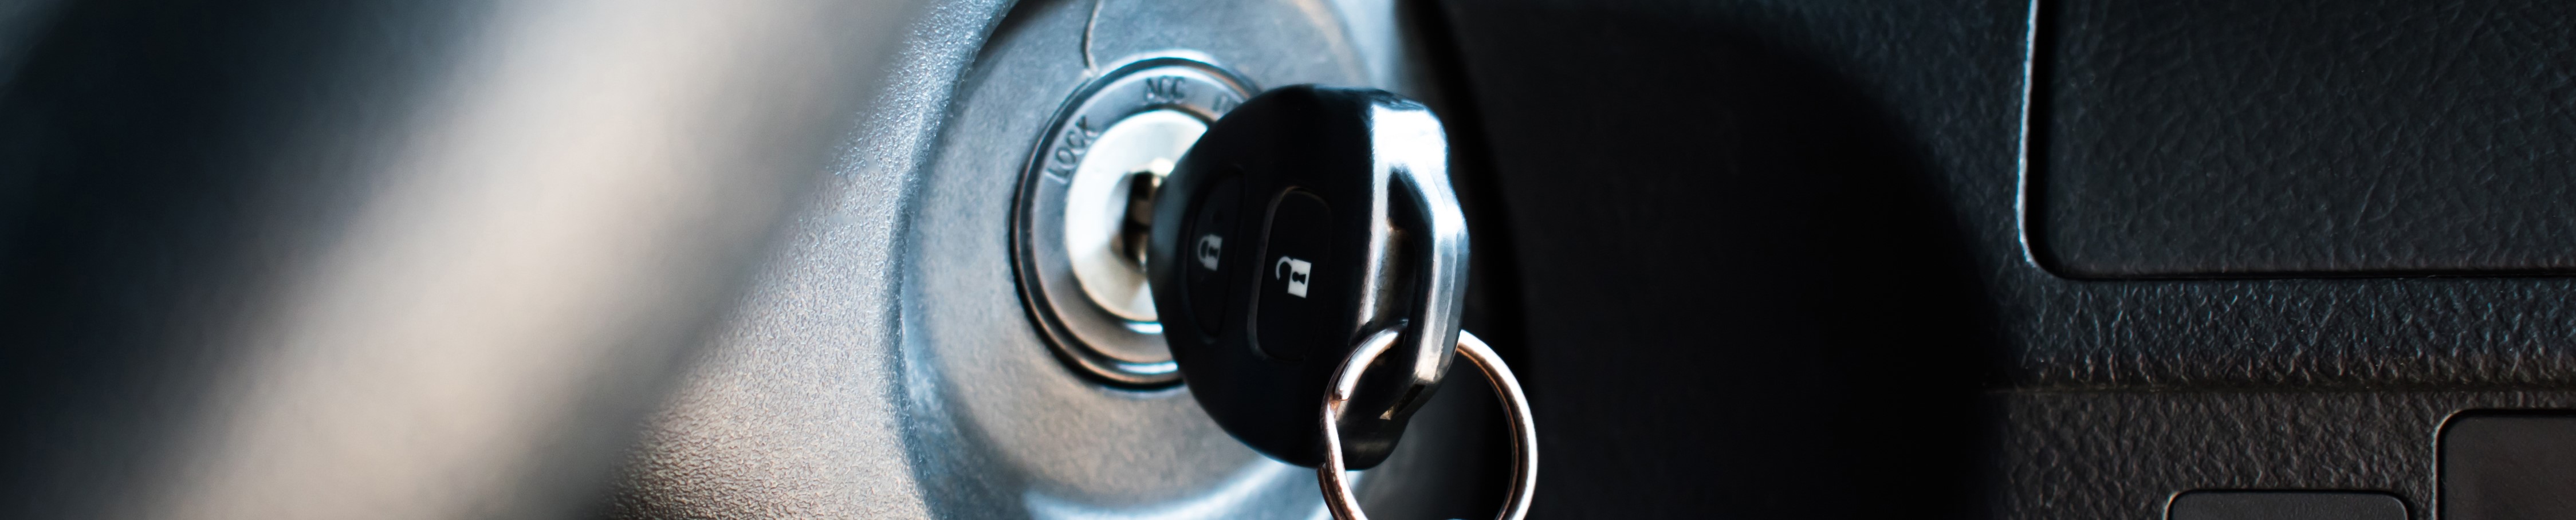 Are You Adequately Securing Your Dealership's Keys?